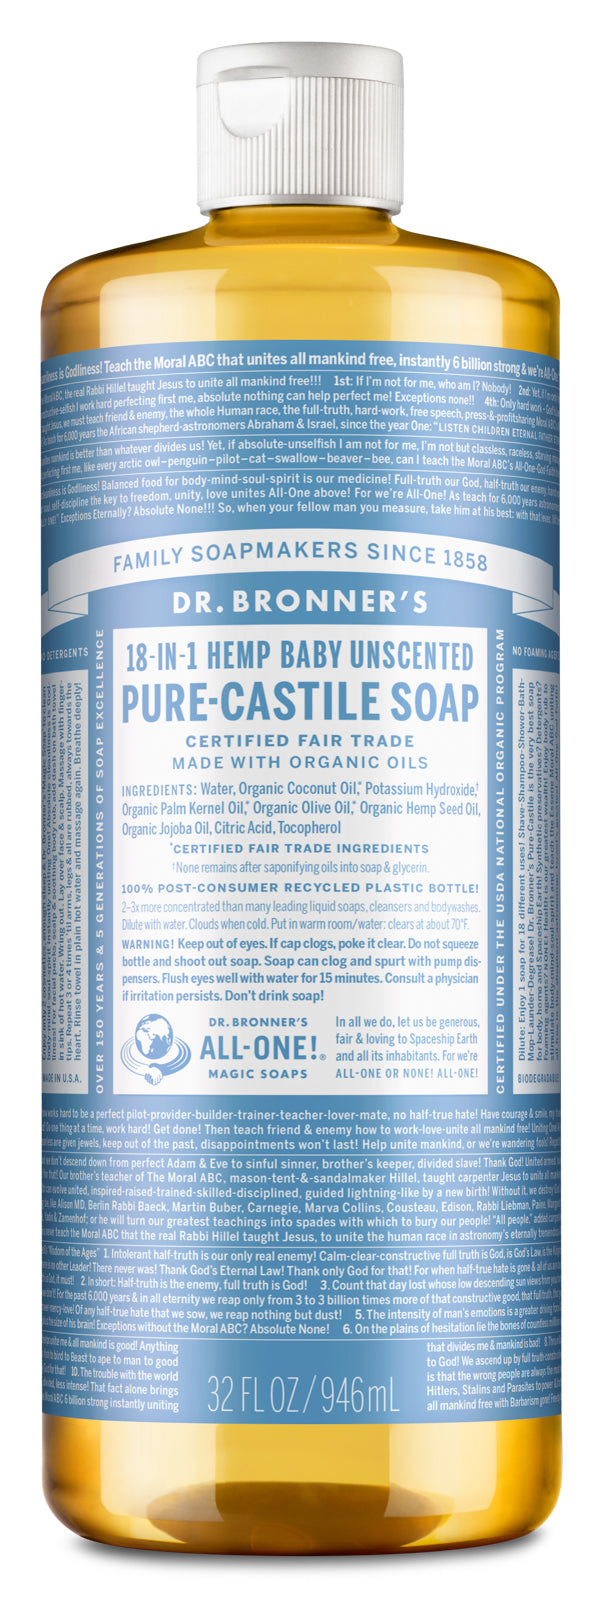 Bronner’s 18-In-1 Hemp Baby Unscented Pure-Castile Soap